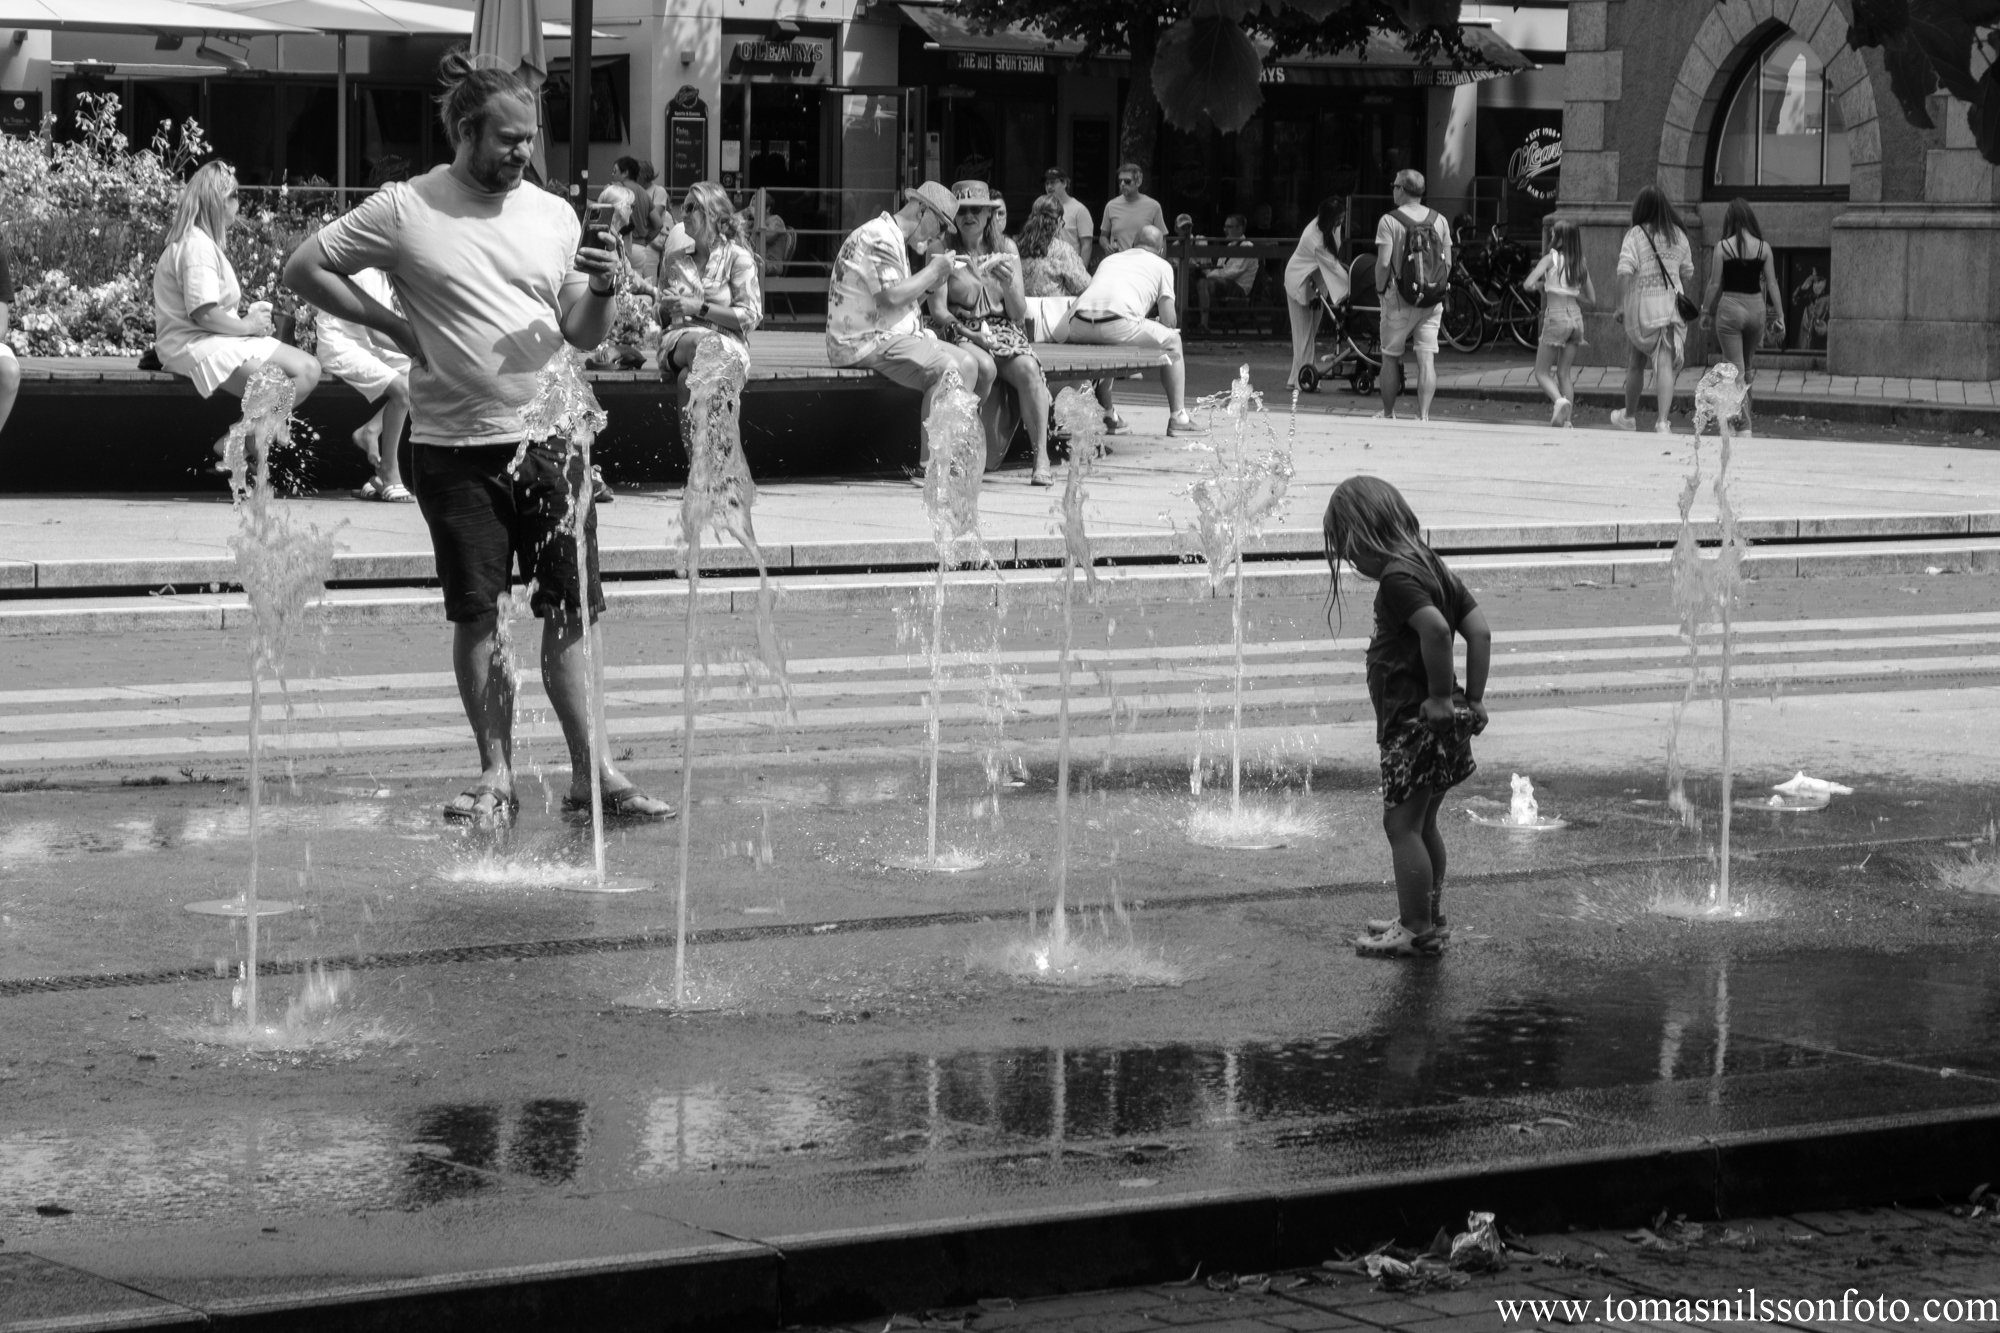 Playing with the waters (Helsingborg, Sweden, 2023)